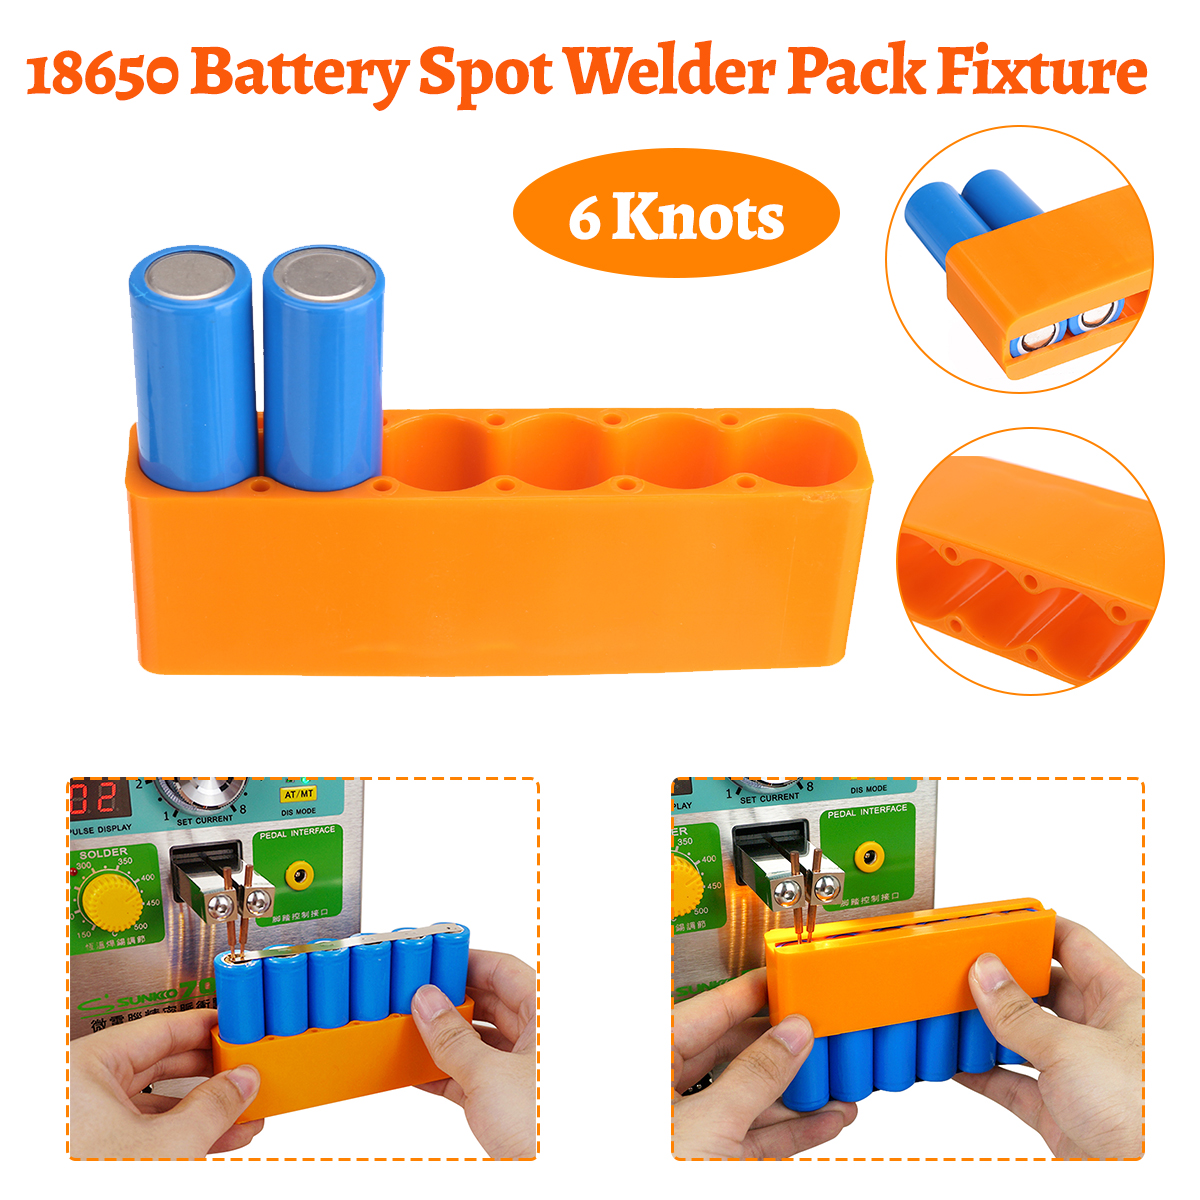 6-Section-18650-Battery-Spot-Welder-Pack-Fixture-Double-Sided-Spot-Welding-without-Battery-1651463-1